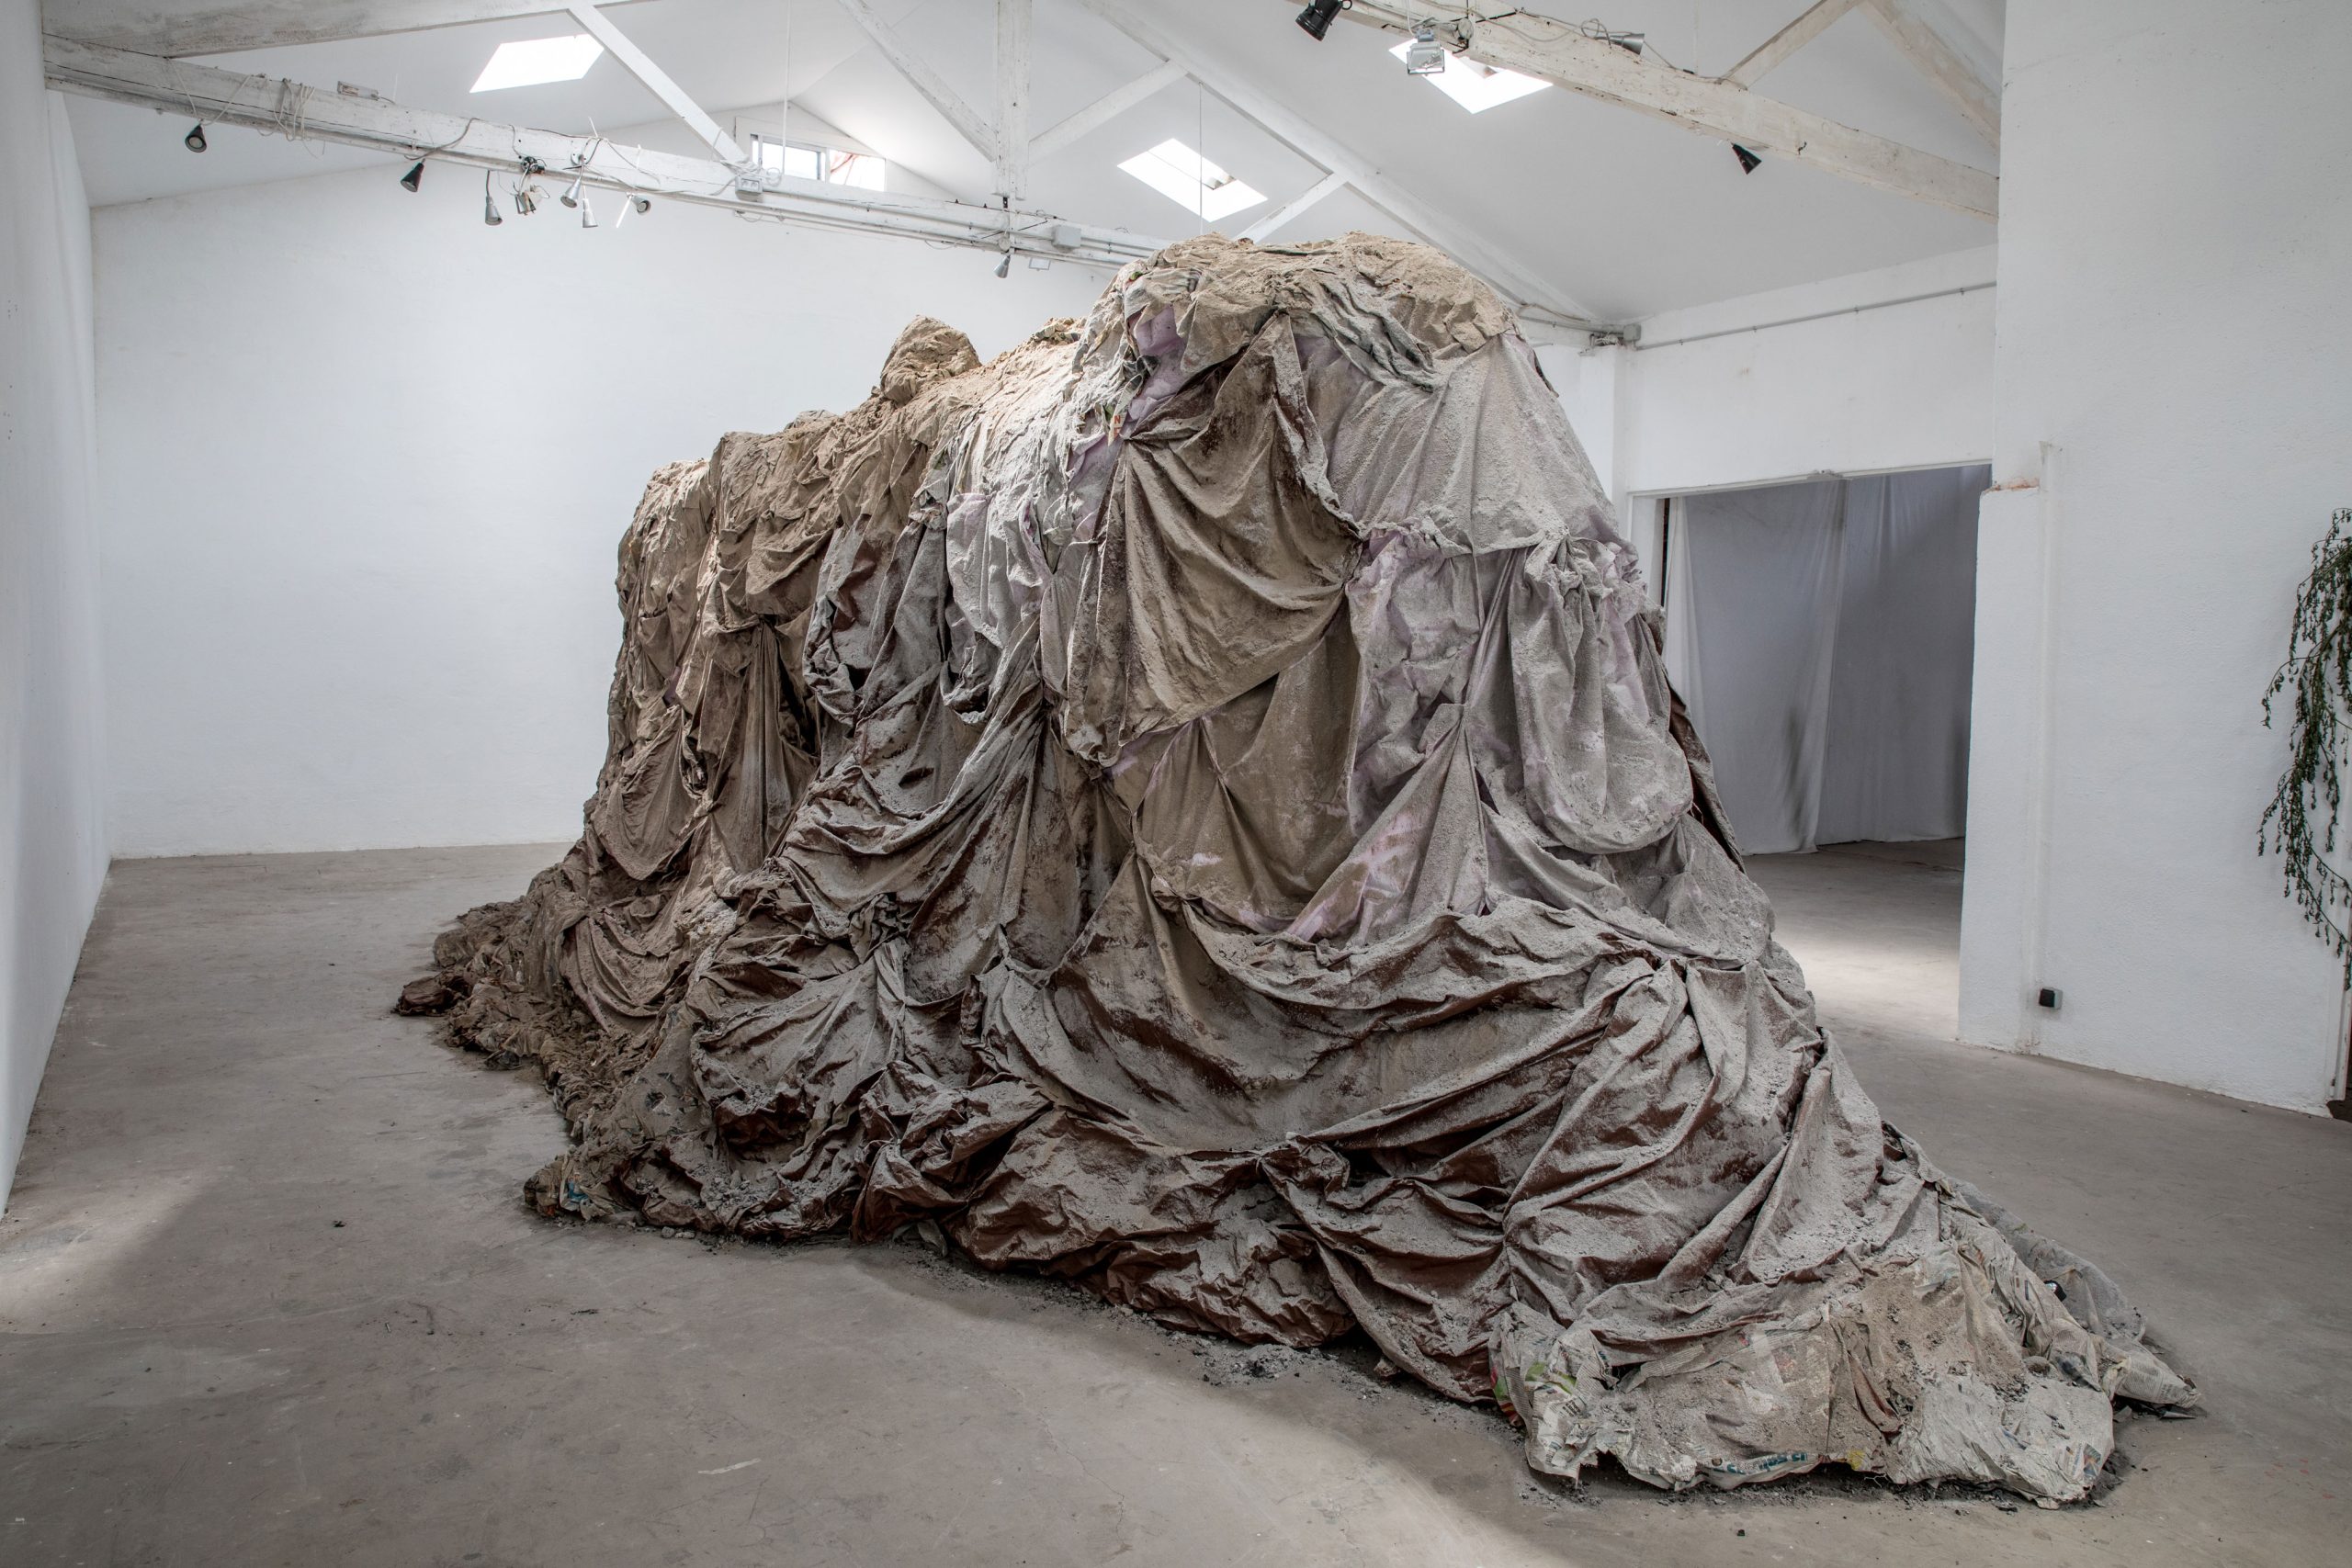 St Elias Hill, 2018, 500kg of ash collected from Barcelona, glue, paper mache, wood and mesh, 276 x 820 x 320 cm. Photo by Vitor Schietti